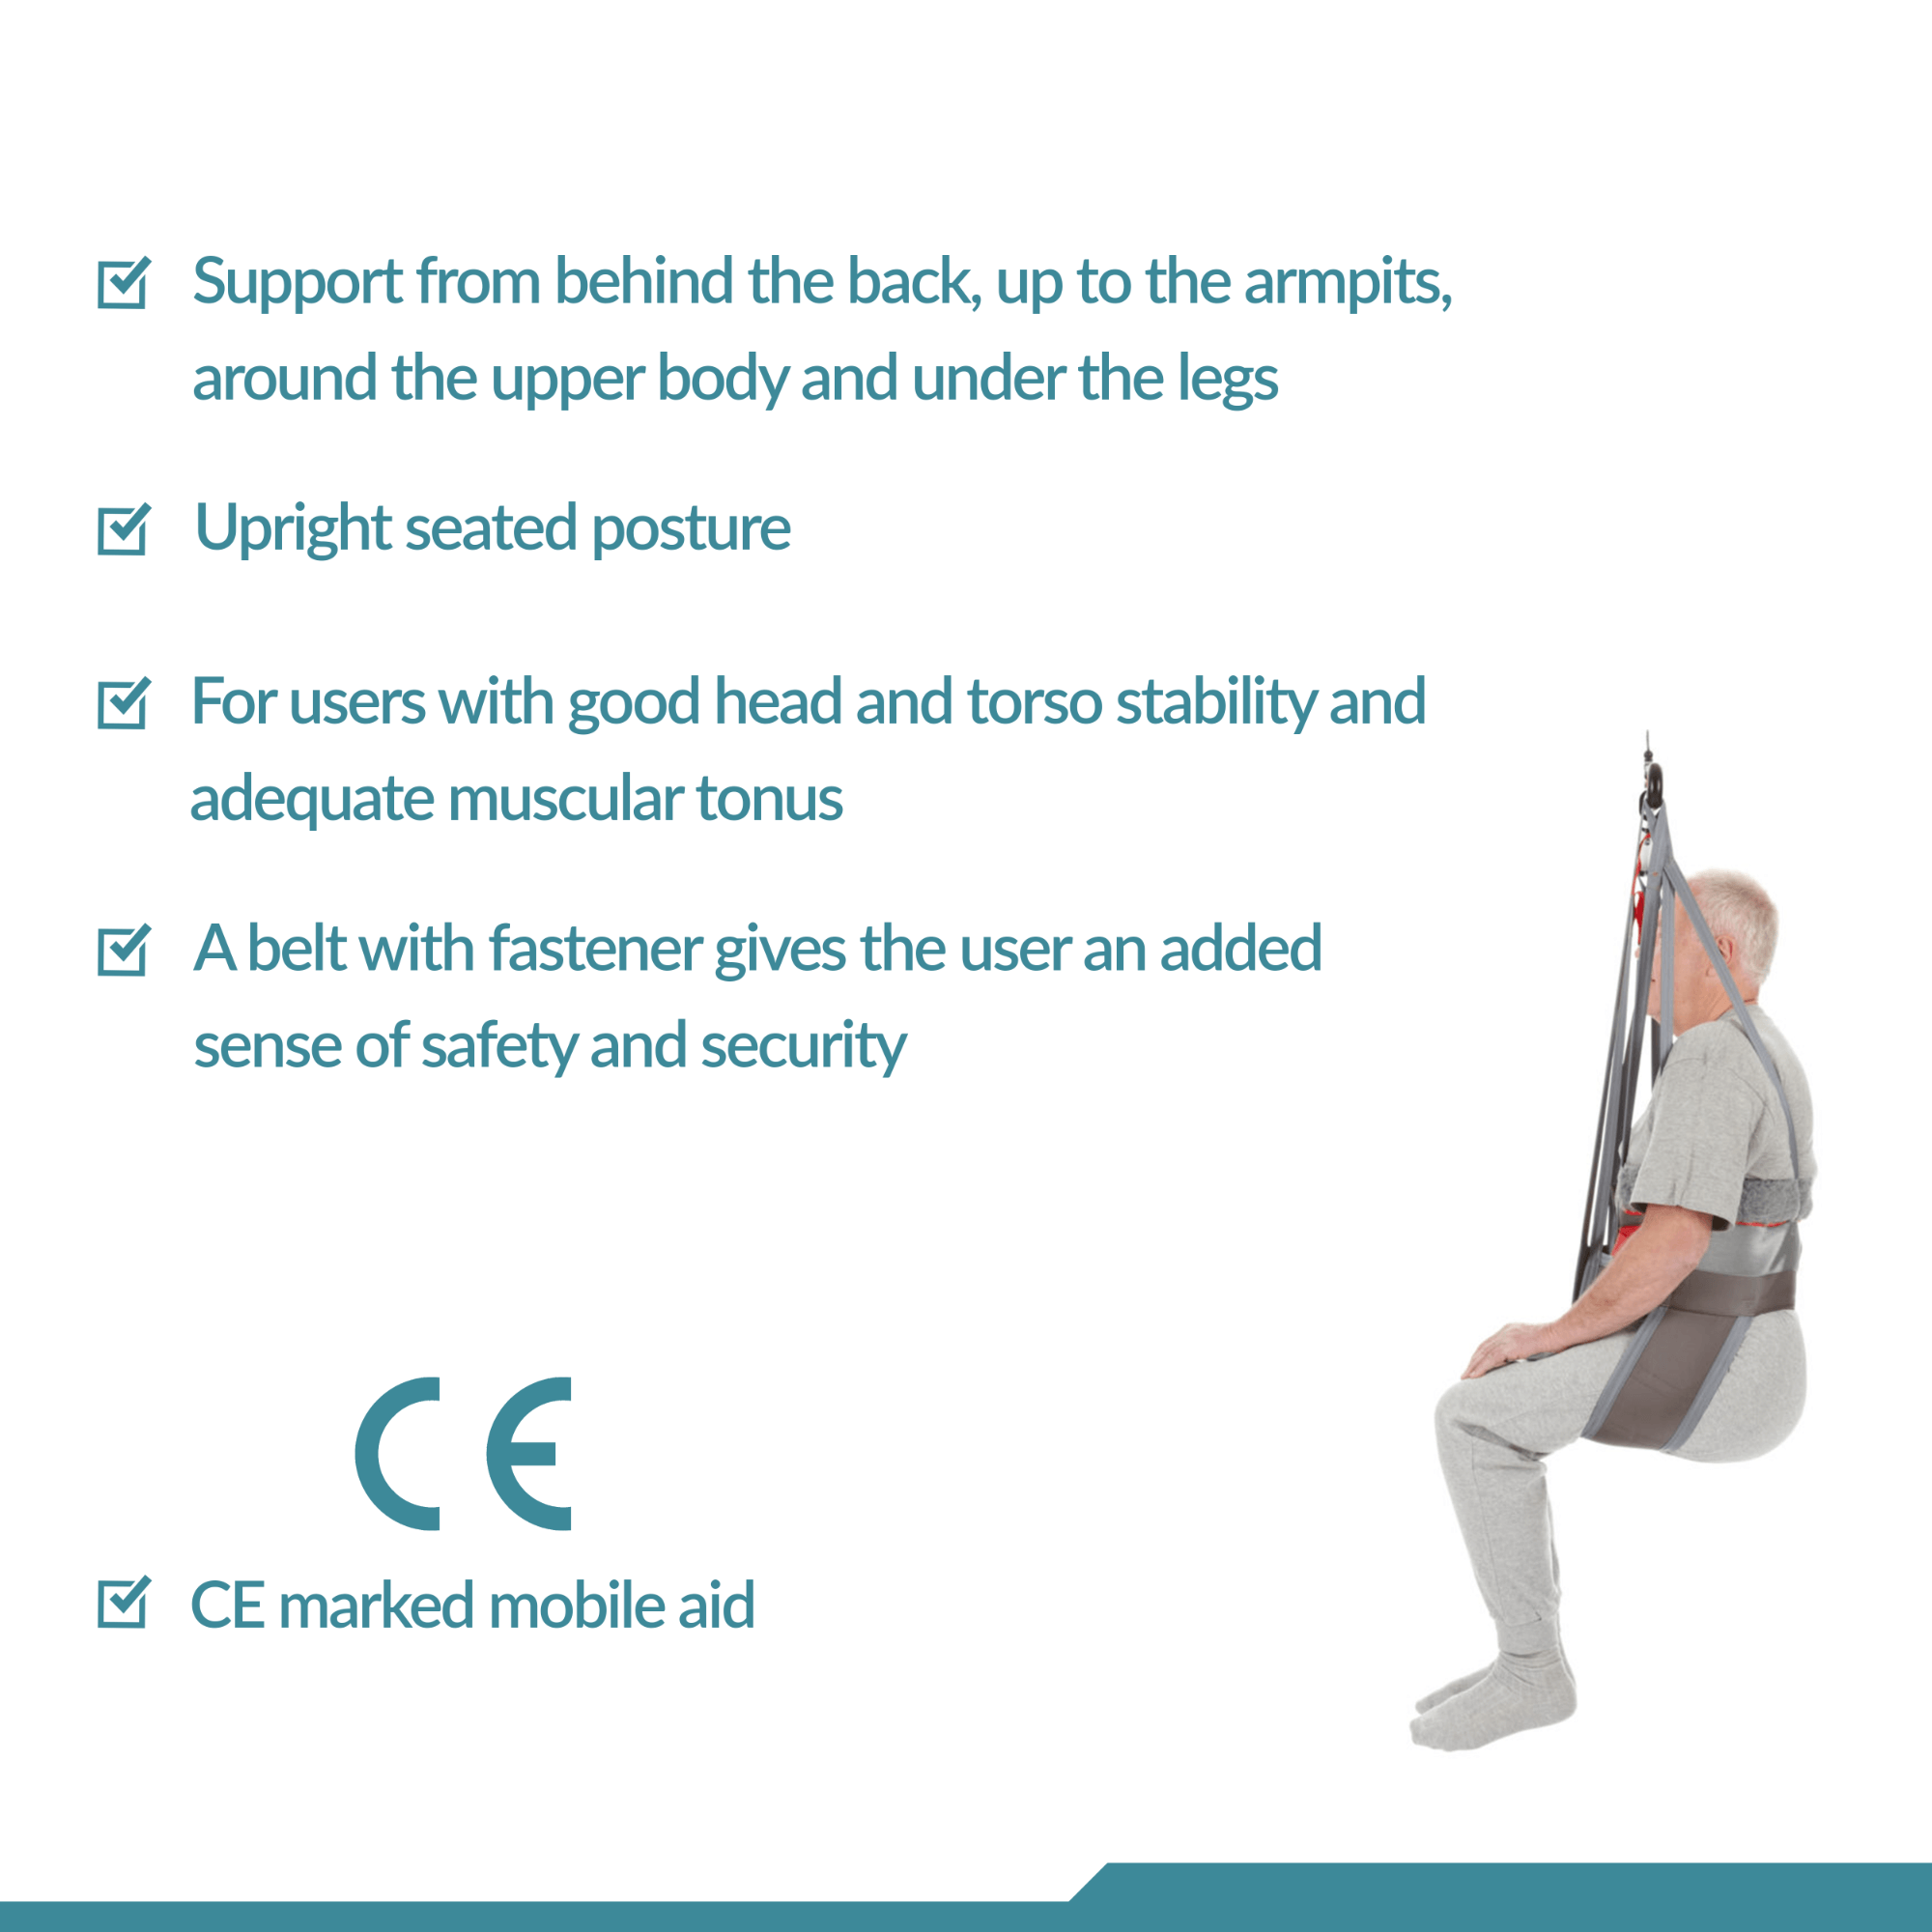 Toileting Sling - Hygiene - Universal Patient Lift Sling for Lifts for Home Use - Transfer Safely with Patient Lifter - Compatible with Hoyer Lift - Easy-to-Use